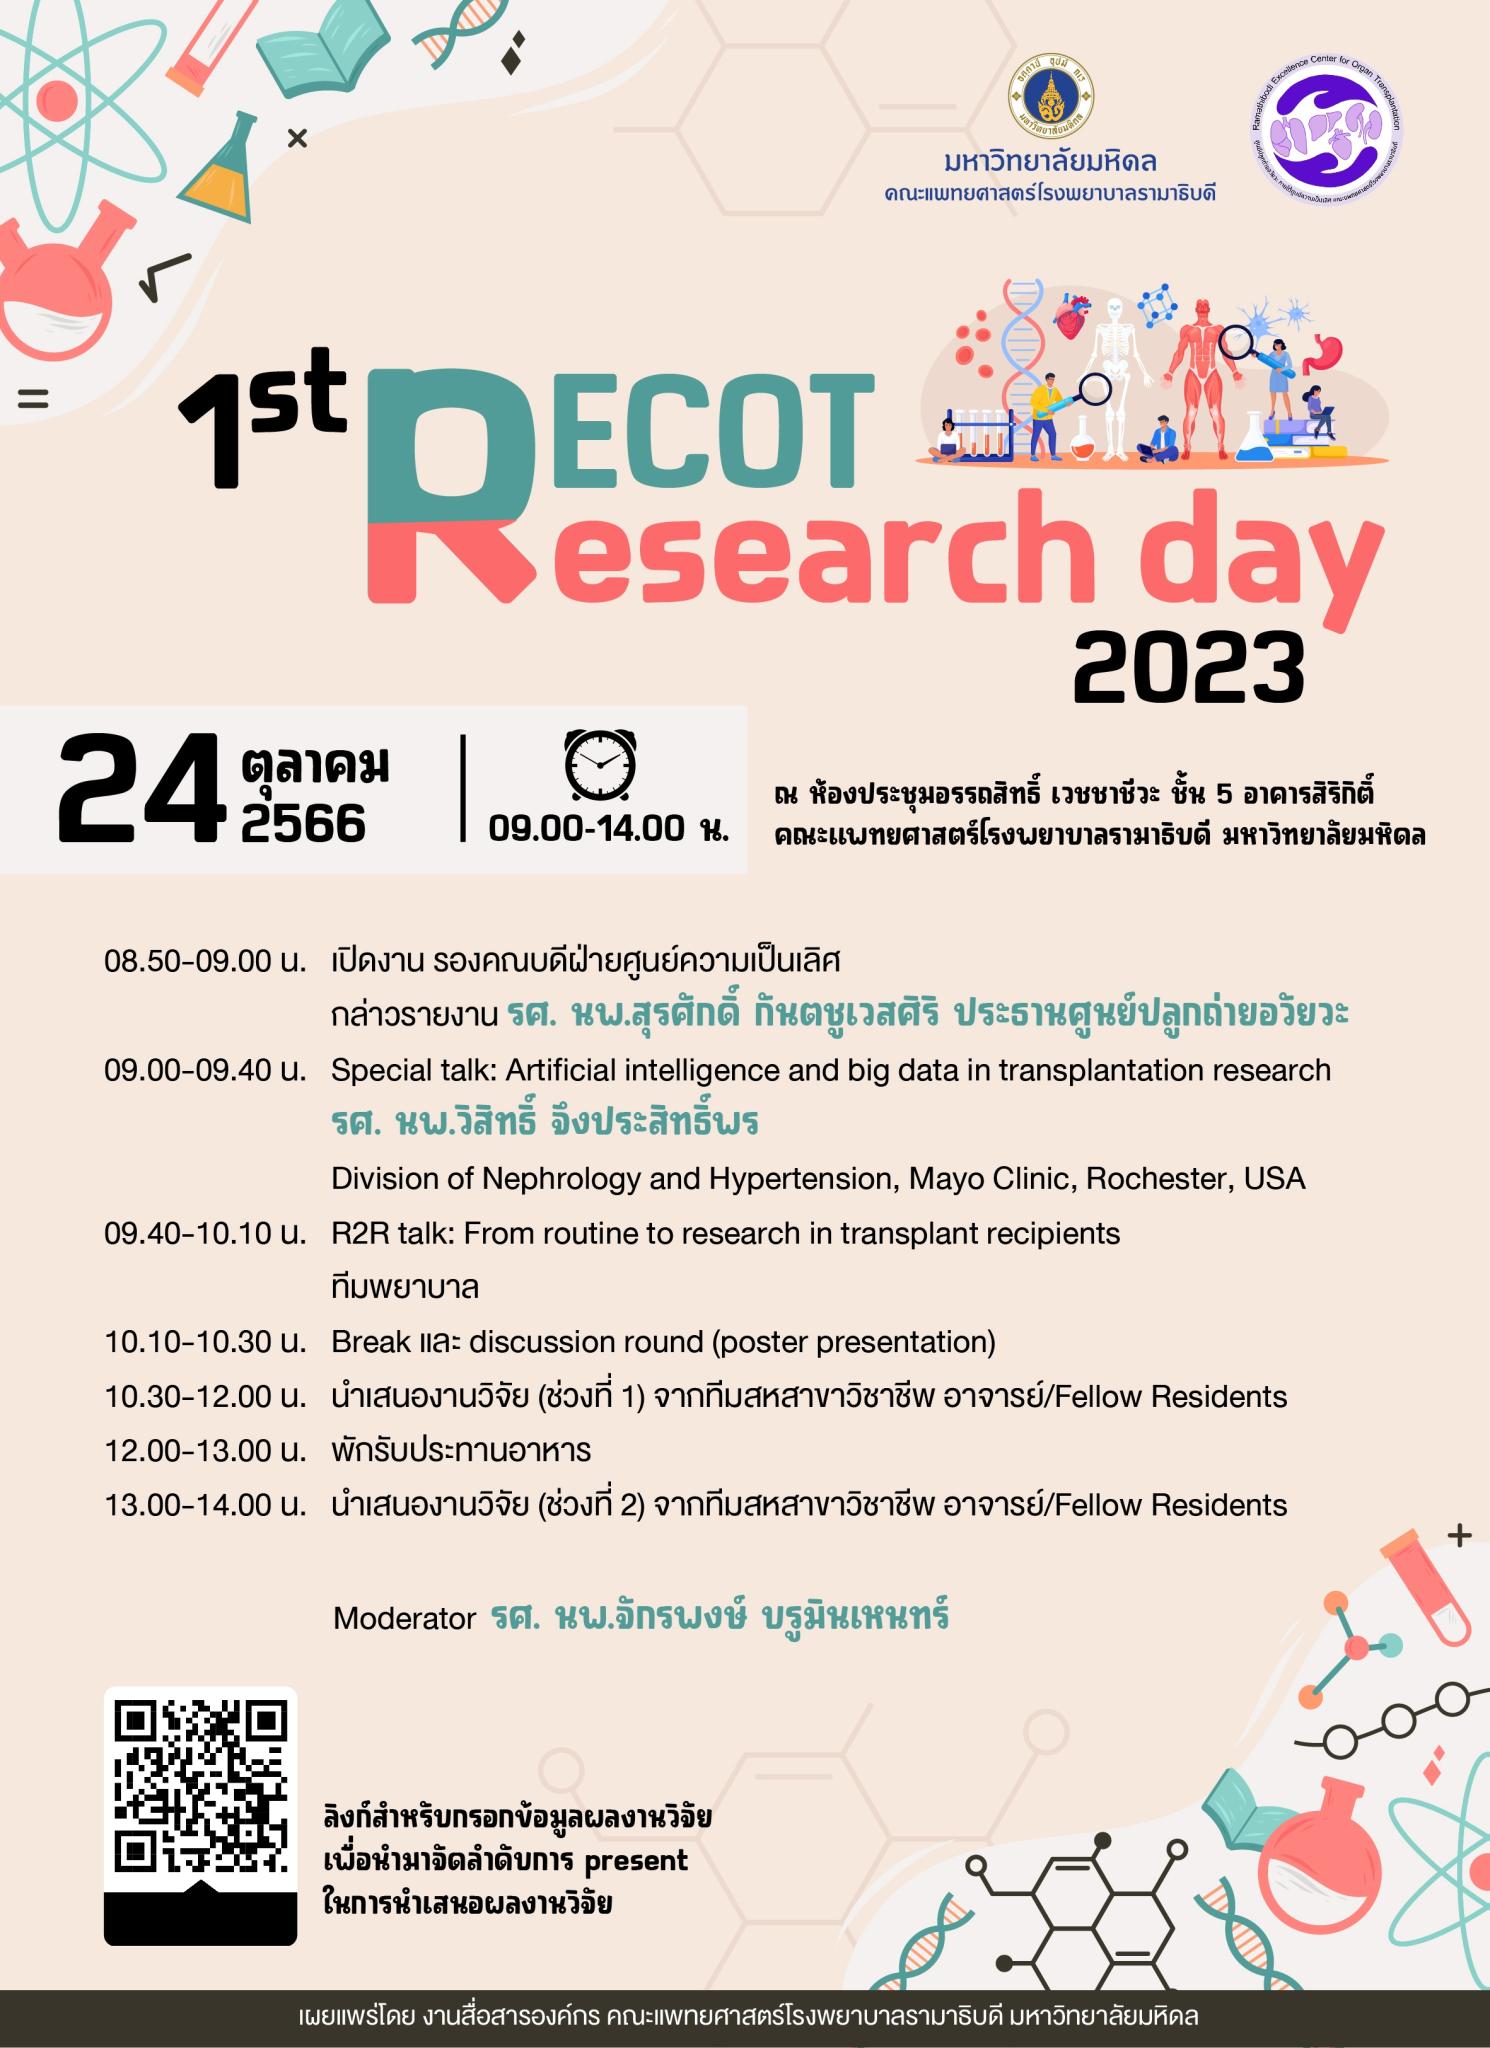 1st RECOT Research day 2023